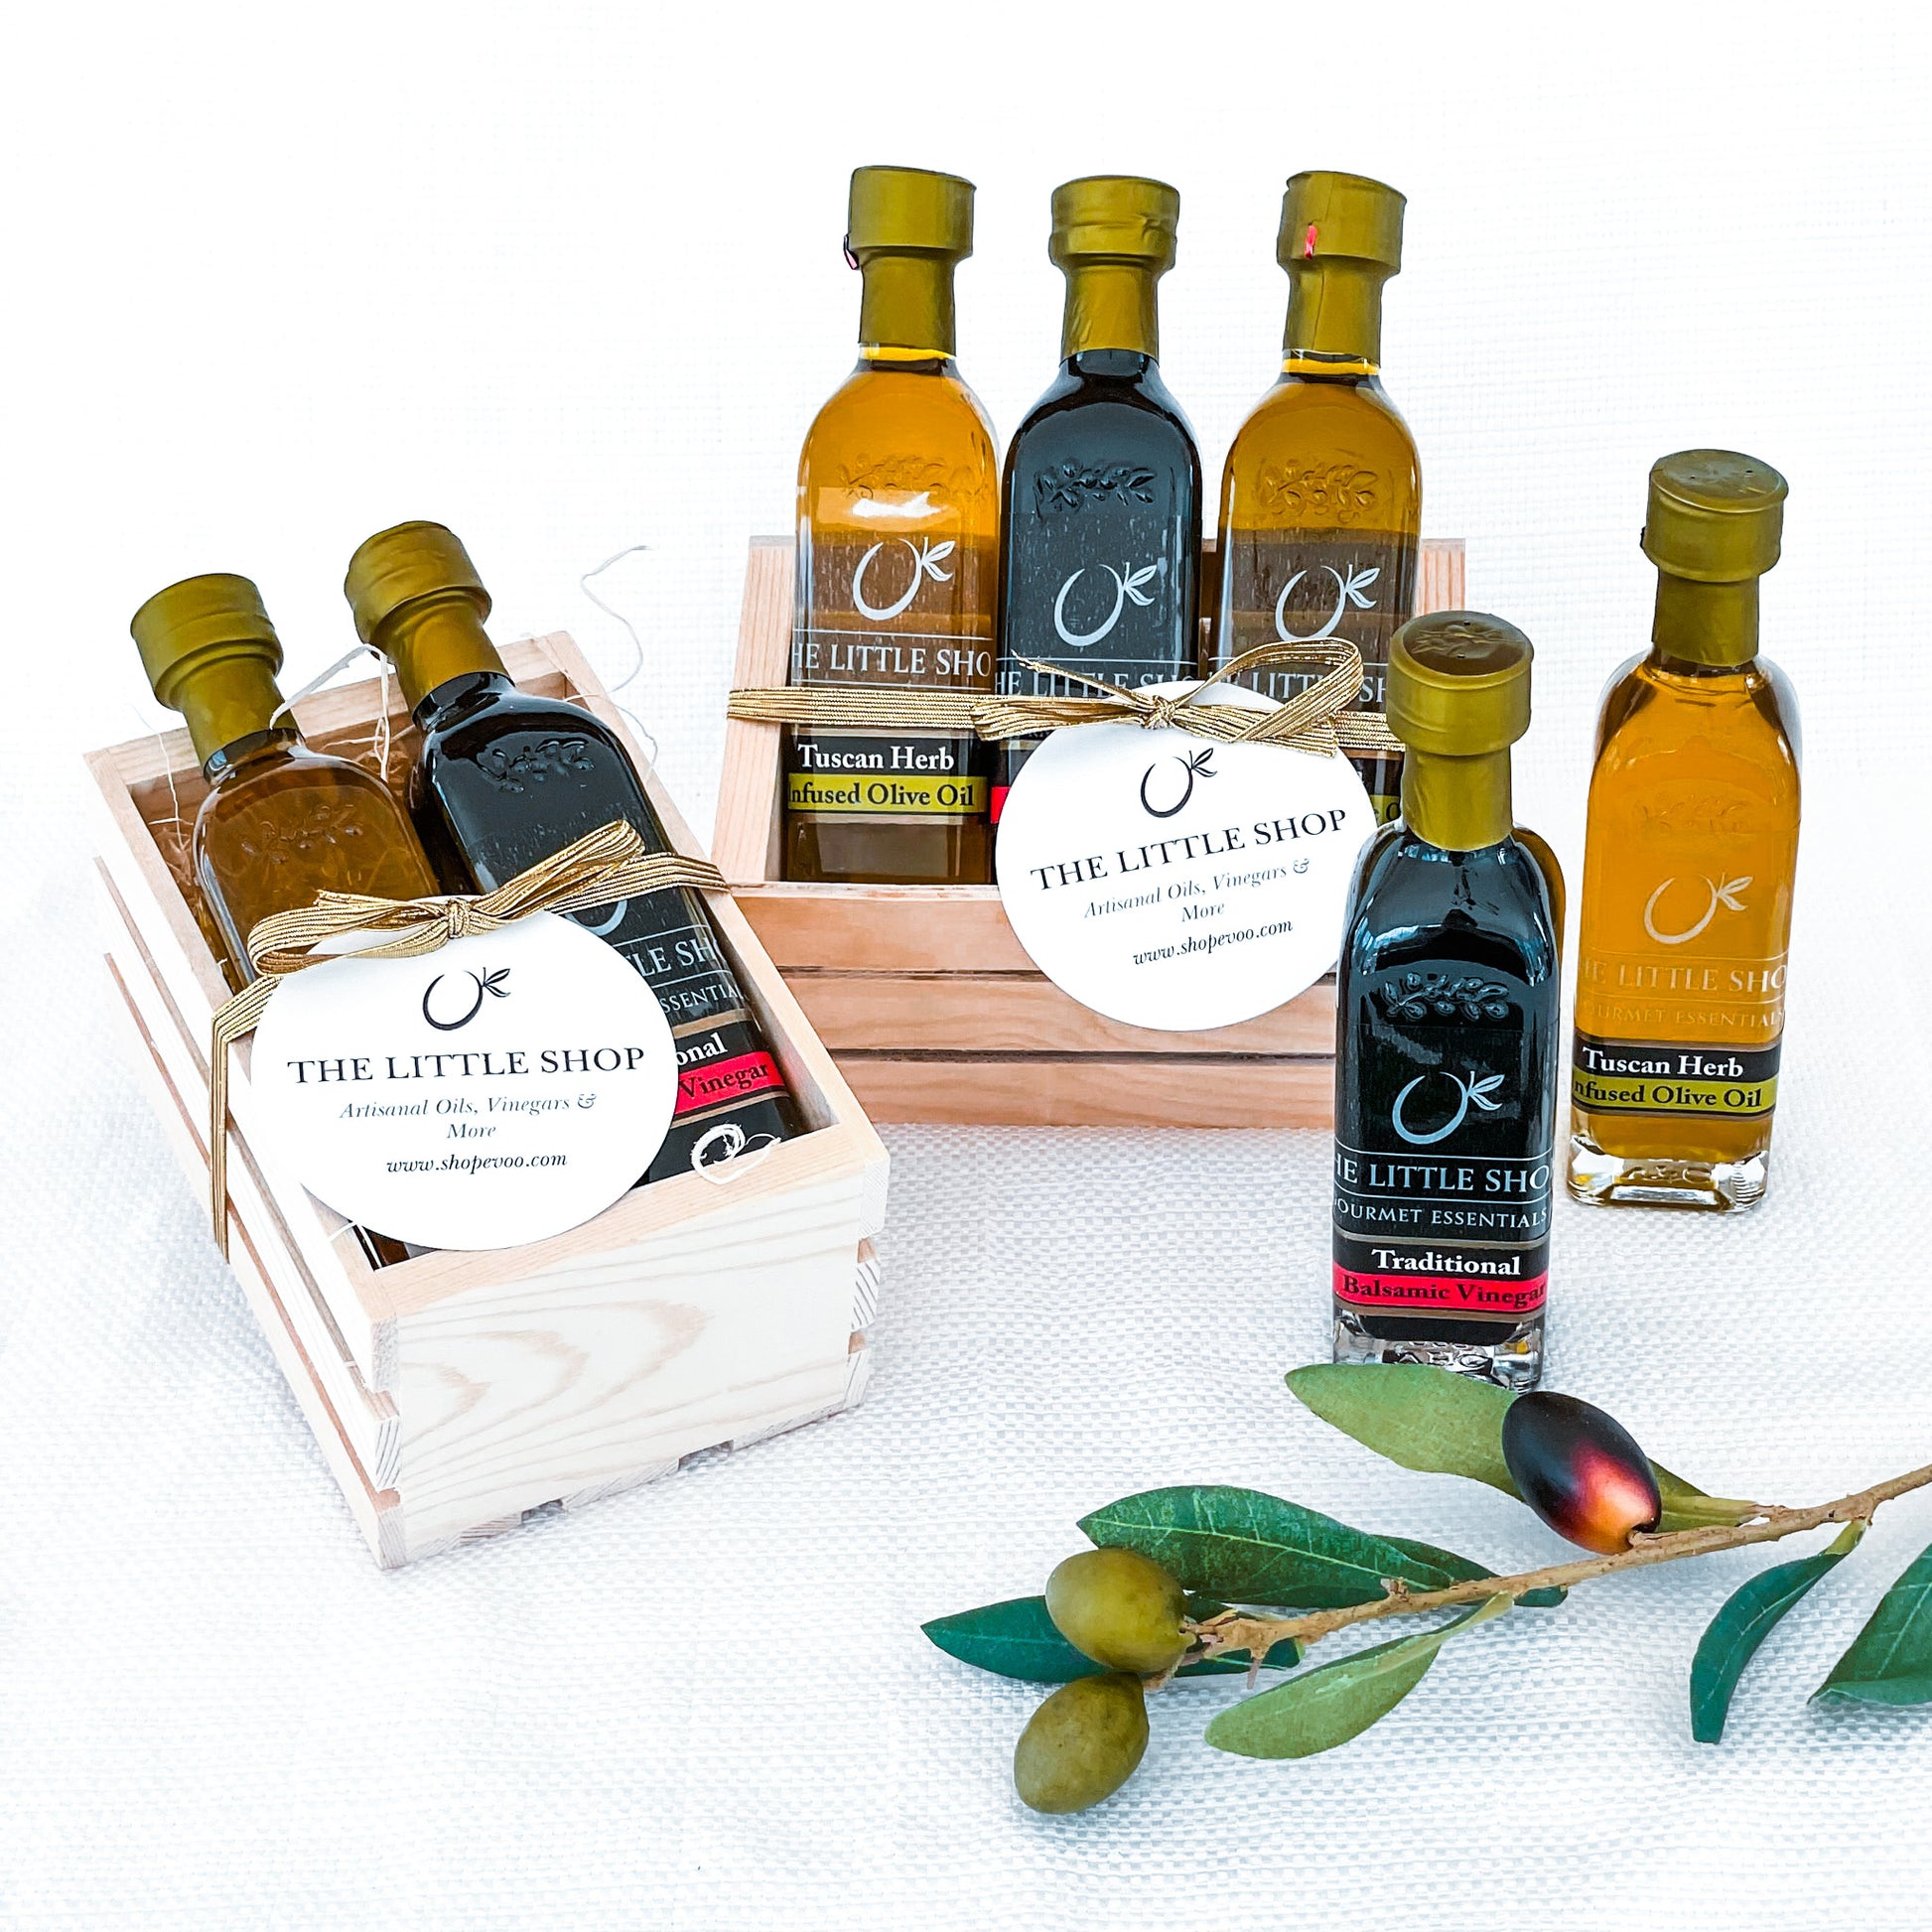 At The Little Shop of Olive Oils, we bring you the very best Premium Extra Virgin Olive Oils, Dark/White Balsamic Vinegar, White and Black Truffle Oil and Salt, Artisan Small Batch Gourmet Groceries, Local Honey, Salts, Spices, Gifts for any home cook. Our products are Healthy, Organic, Non-GMO, Kosher, Gluten Free. 